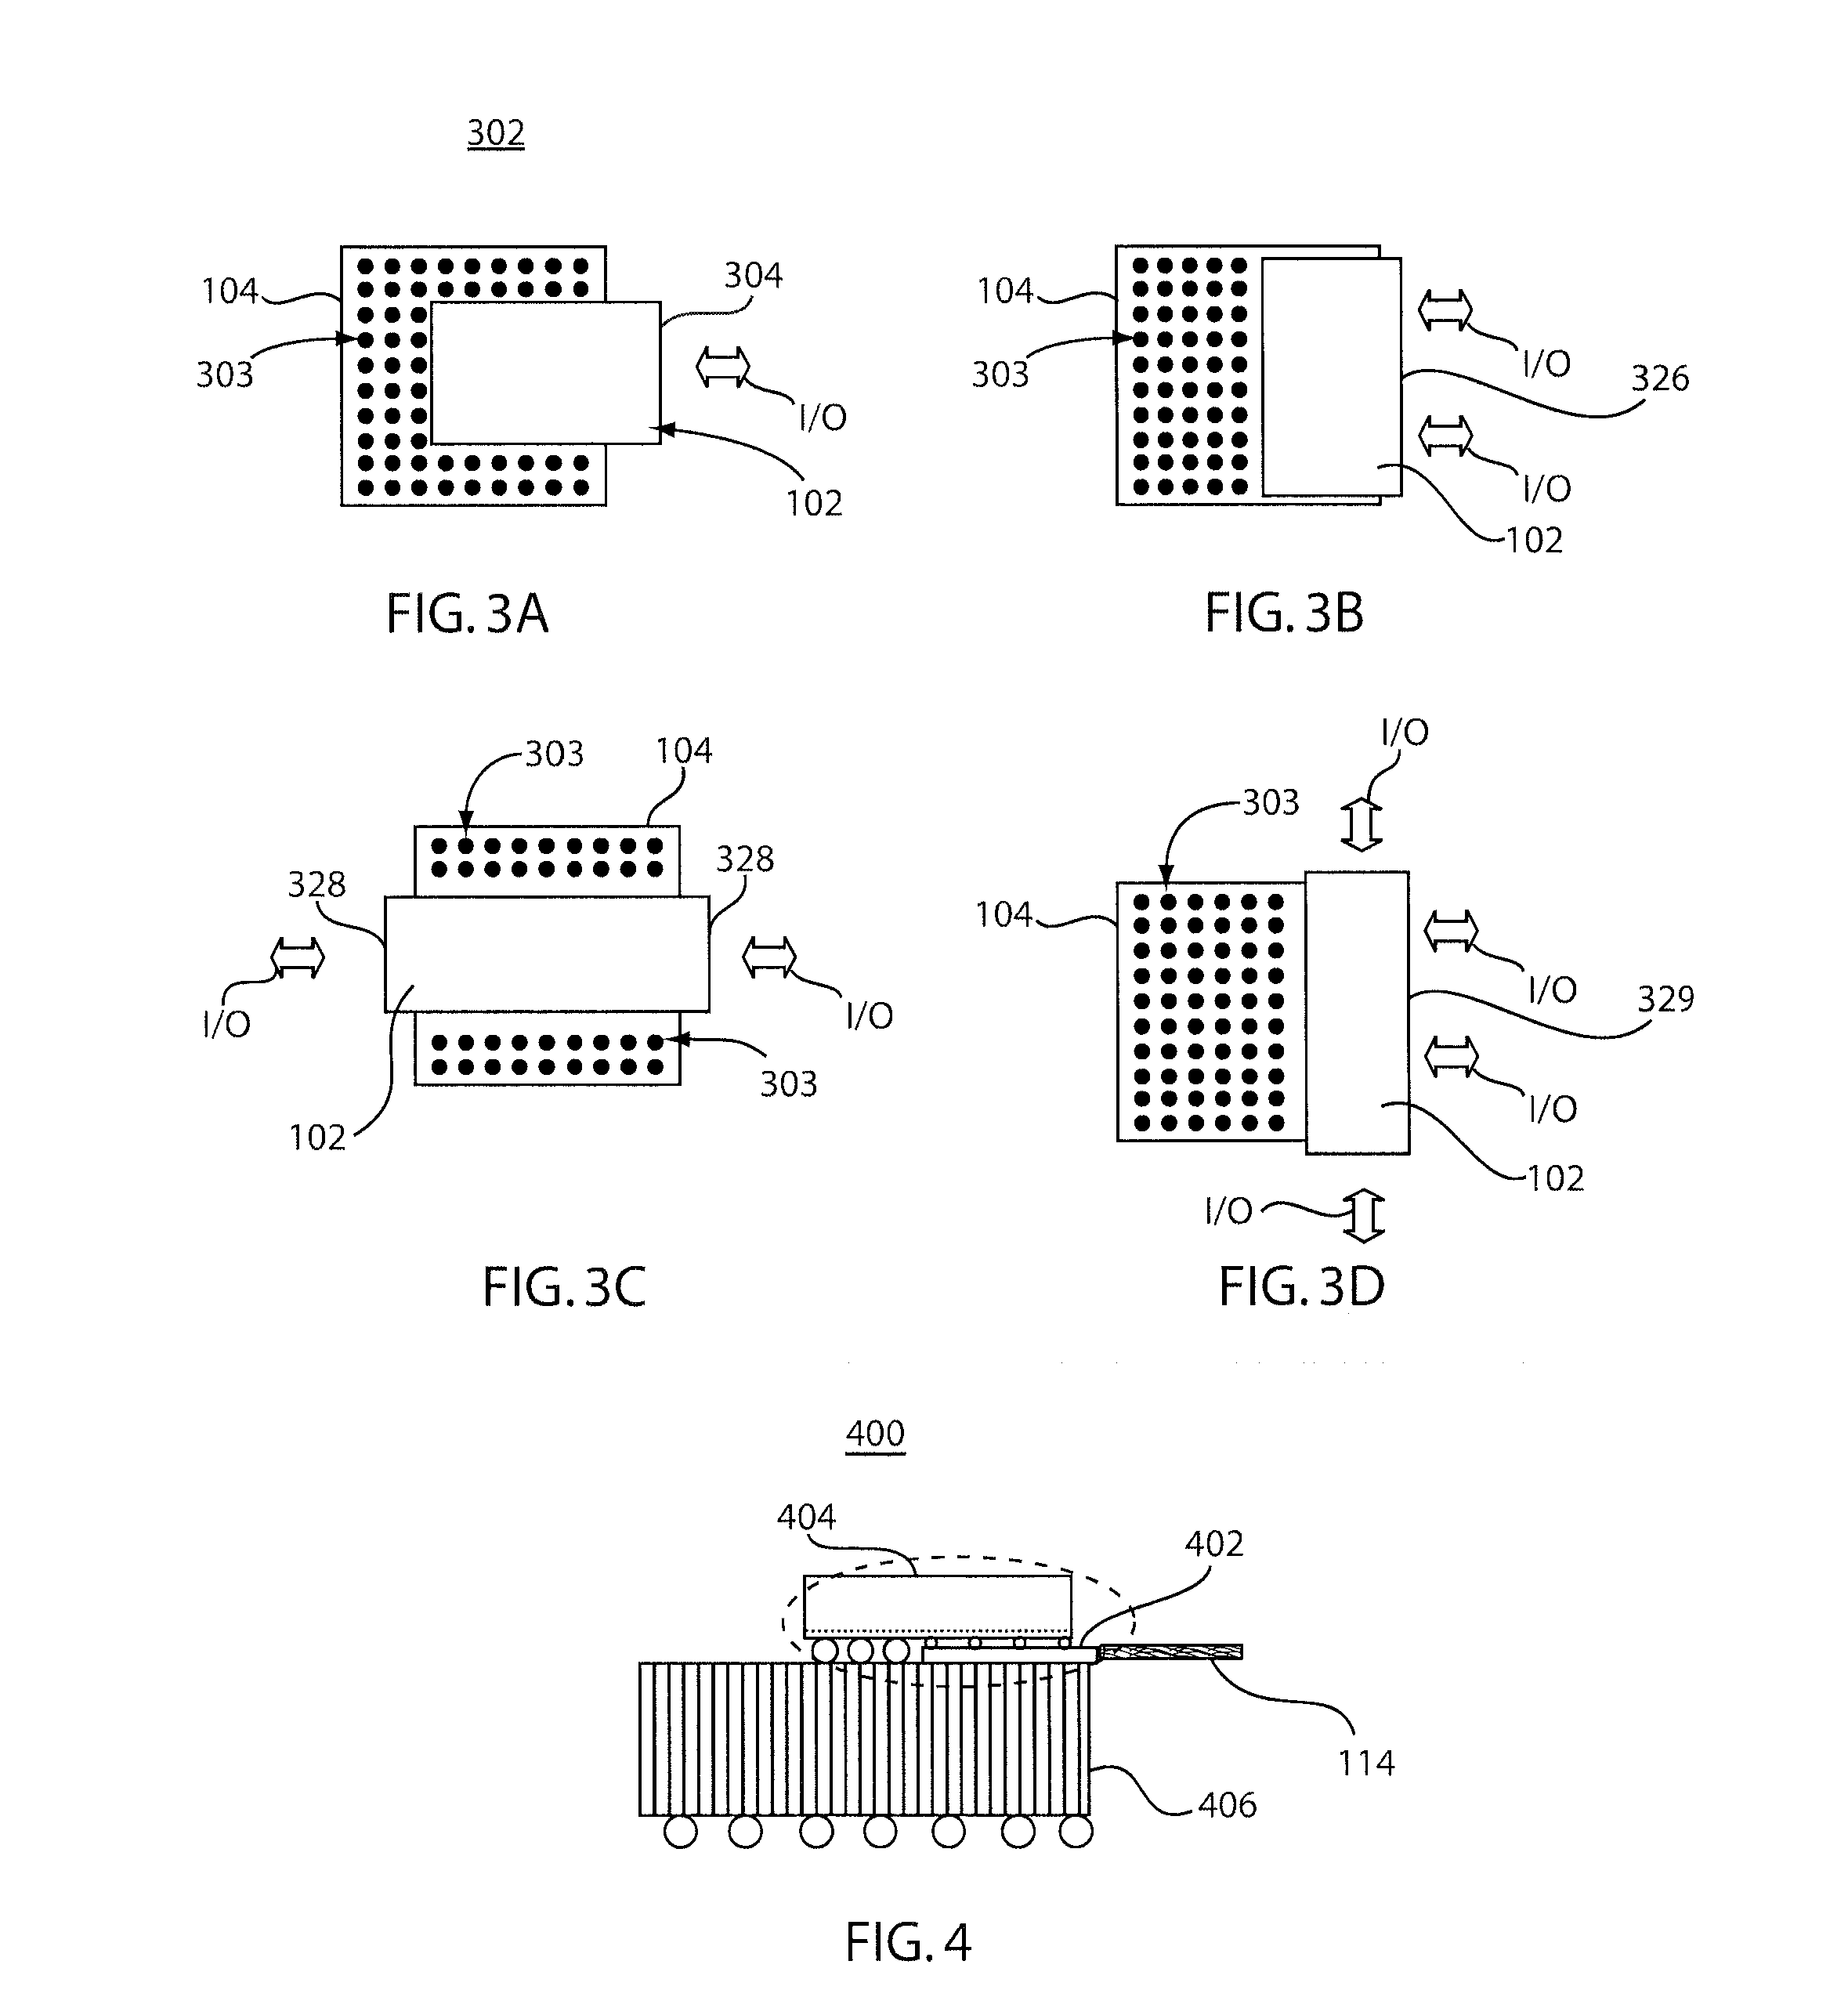 Flip-chip packaging for dense hybrid integration of electrical and photonic integrated circuits